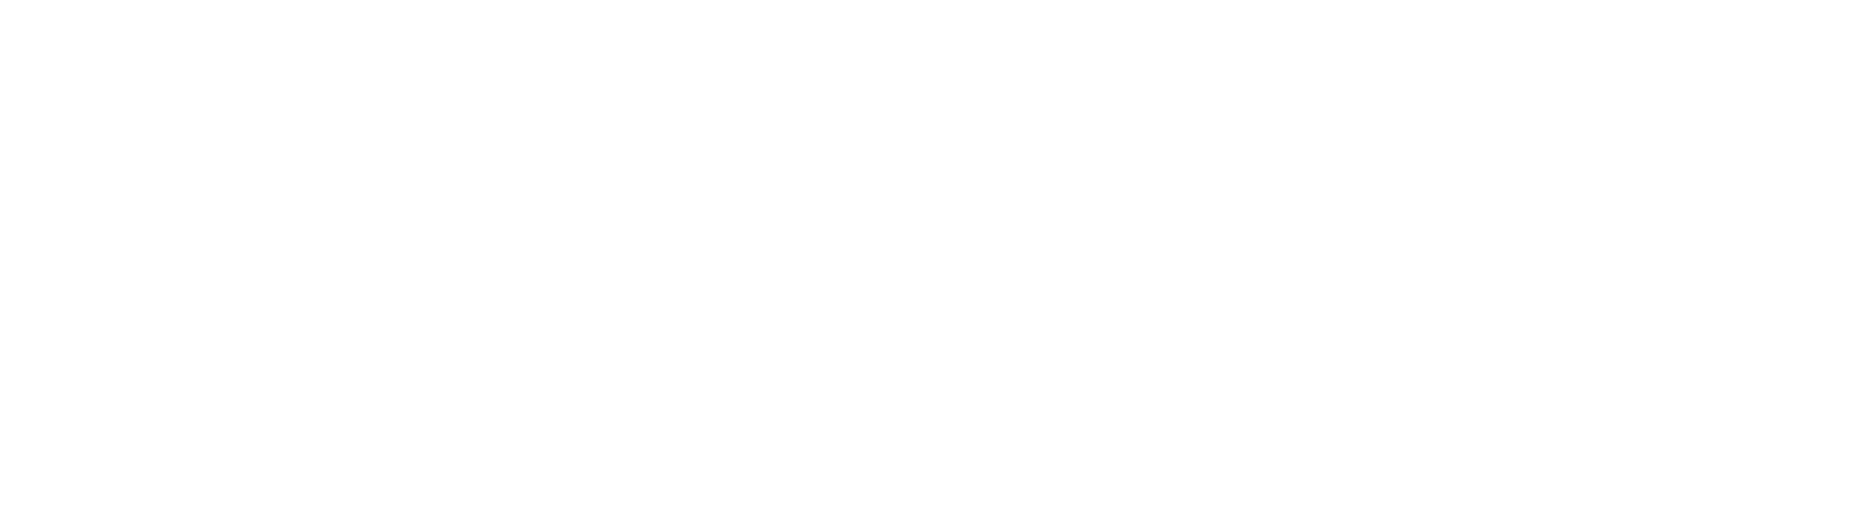 Forever Yours HD 3D 4D Ultrasound